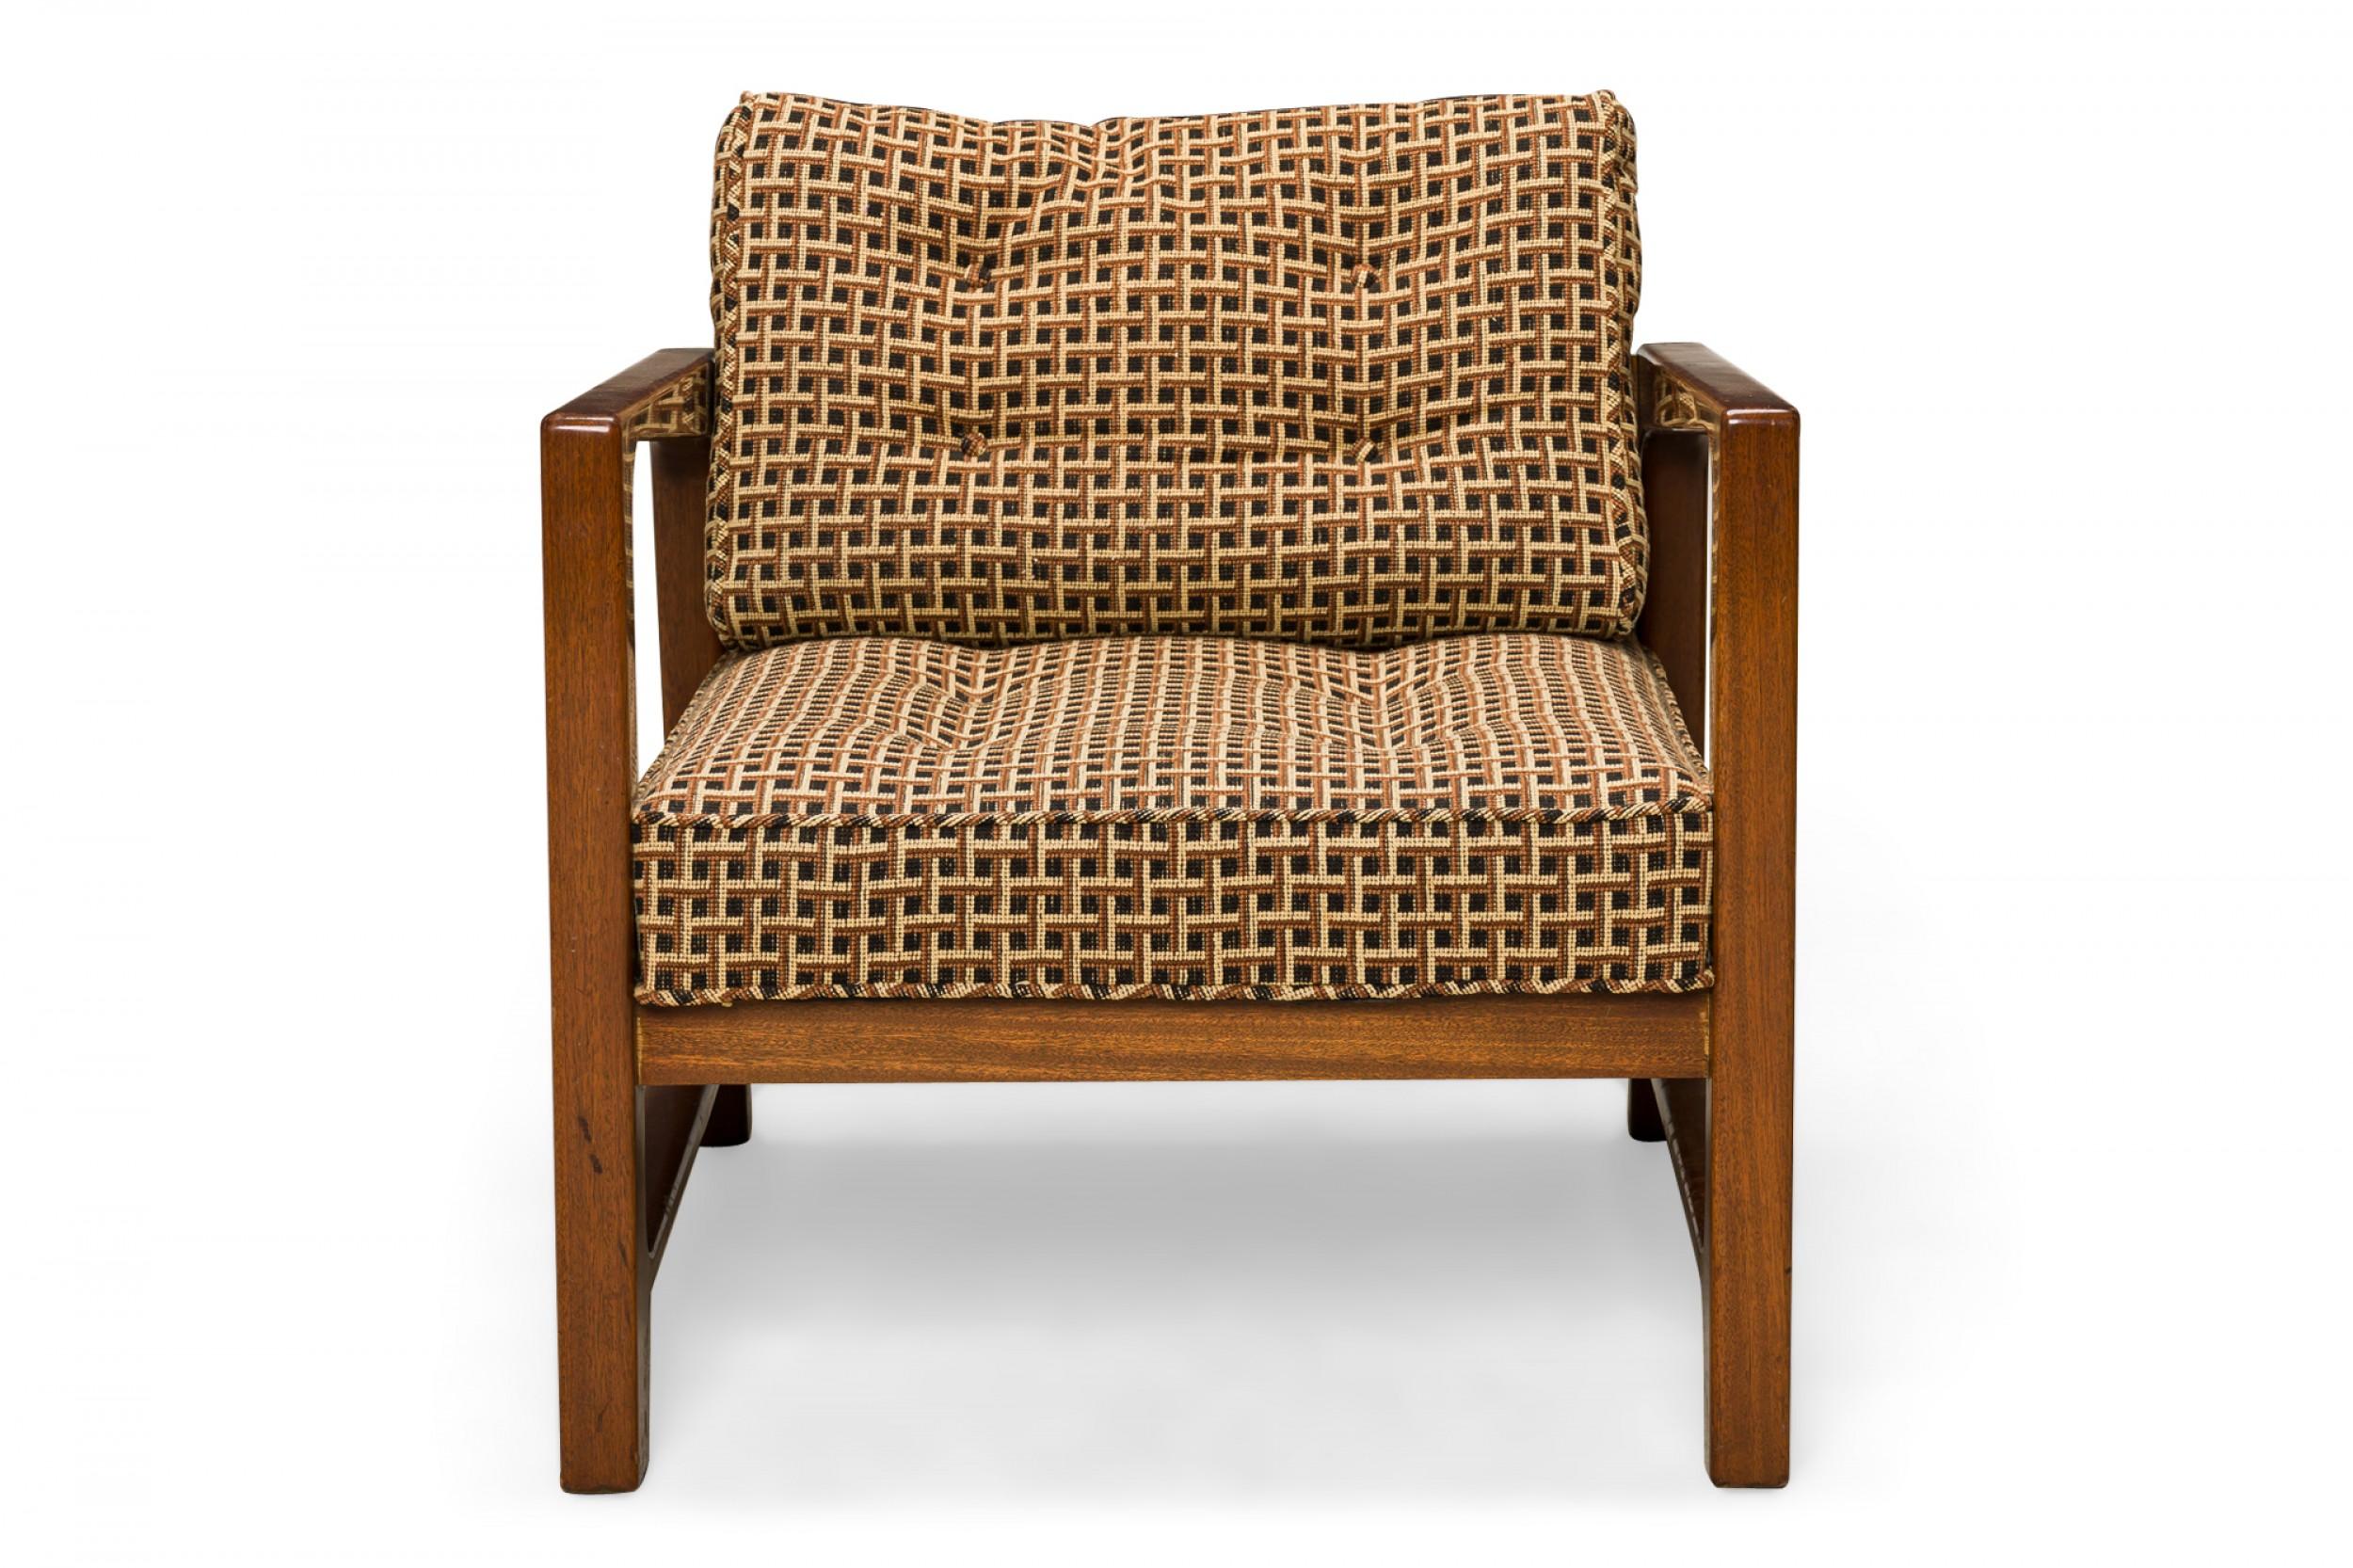 American mid-century lounge armchair with a shaped walnut frame with two wooden armrests, and seat and back cushions upholstered in a geometric patterned fabric in neutral browns and beiges with button tufting. (HARVEY PROBBER)